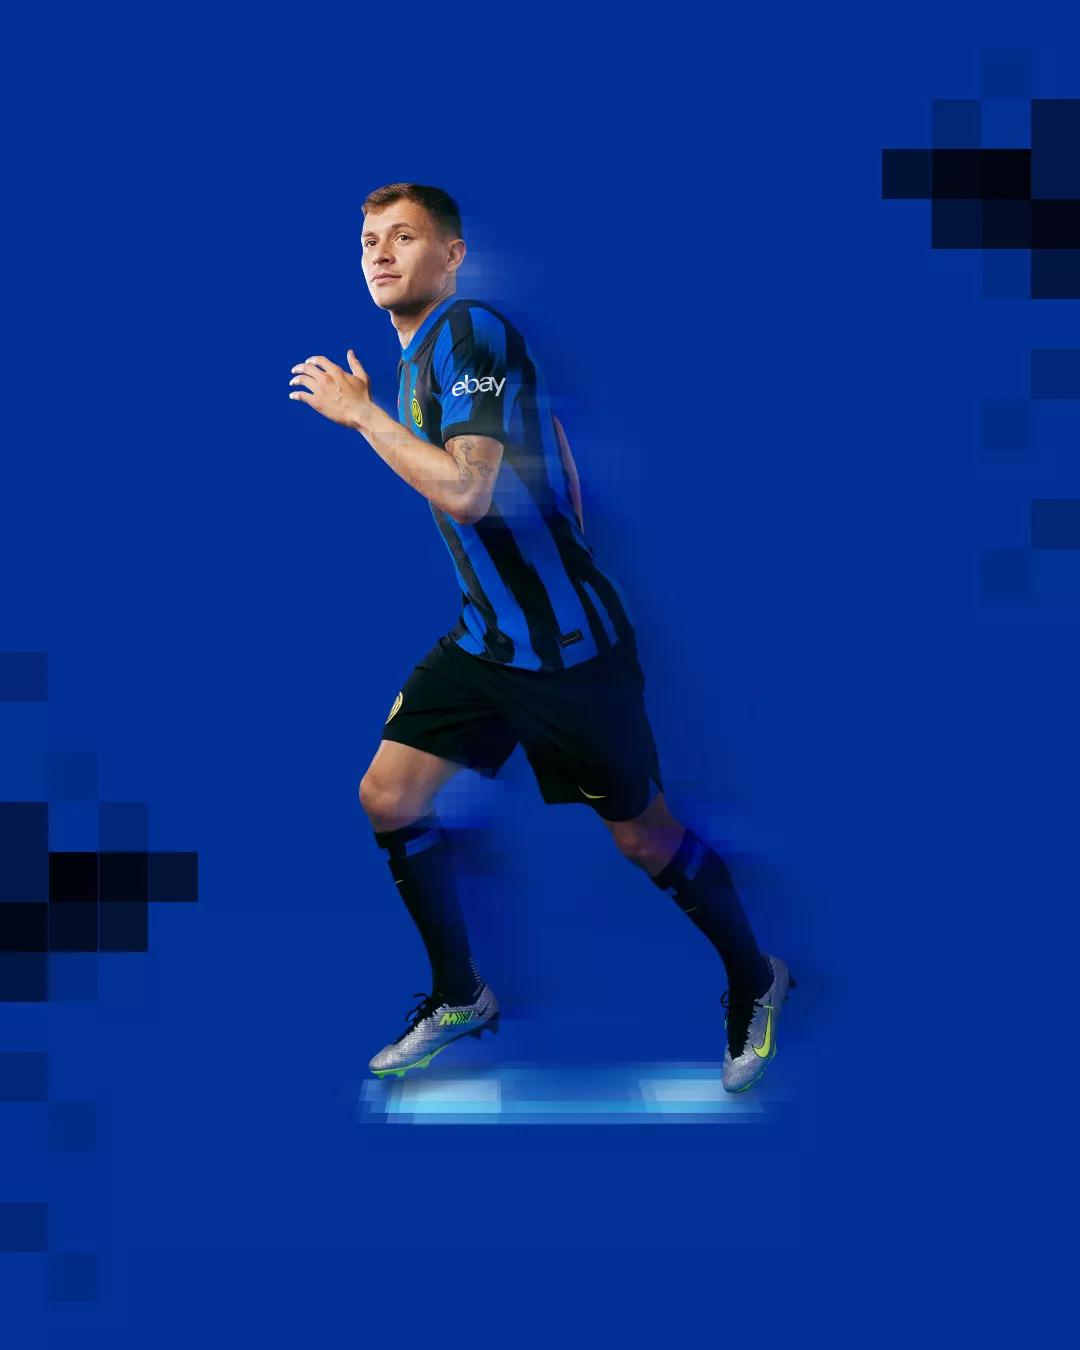 Official] Inter's third kit is now available in the Inter store